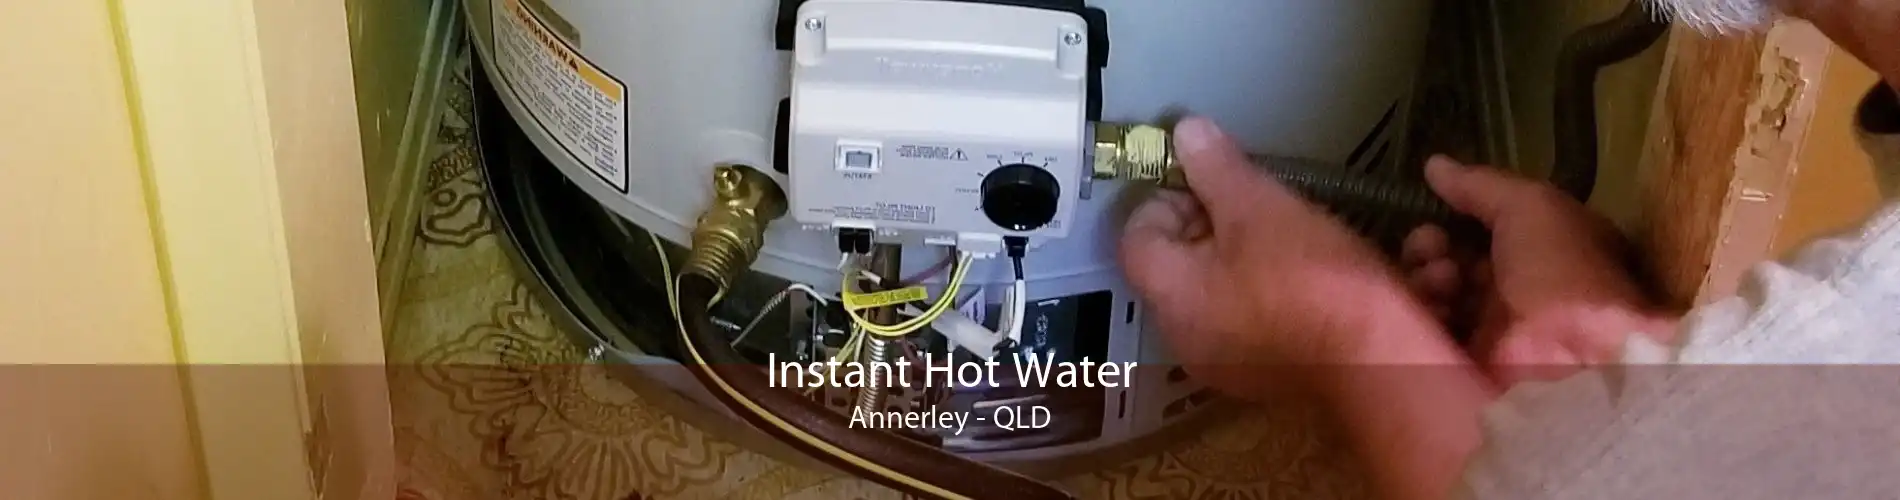 Instant Hot Water Annerley - QLD